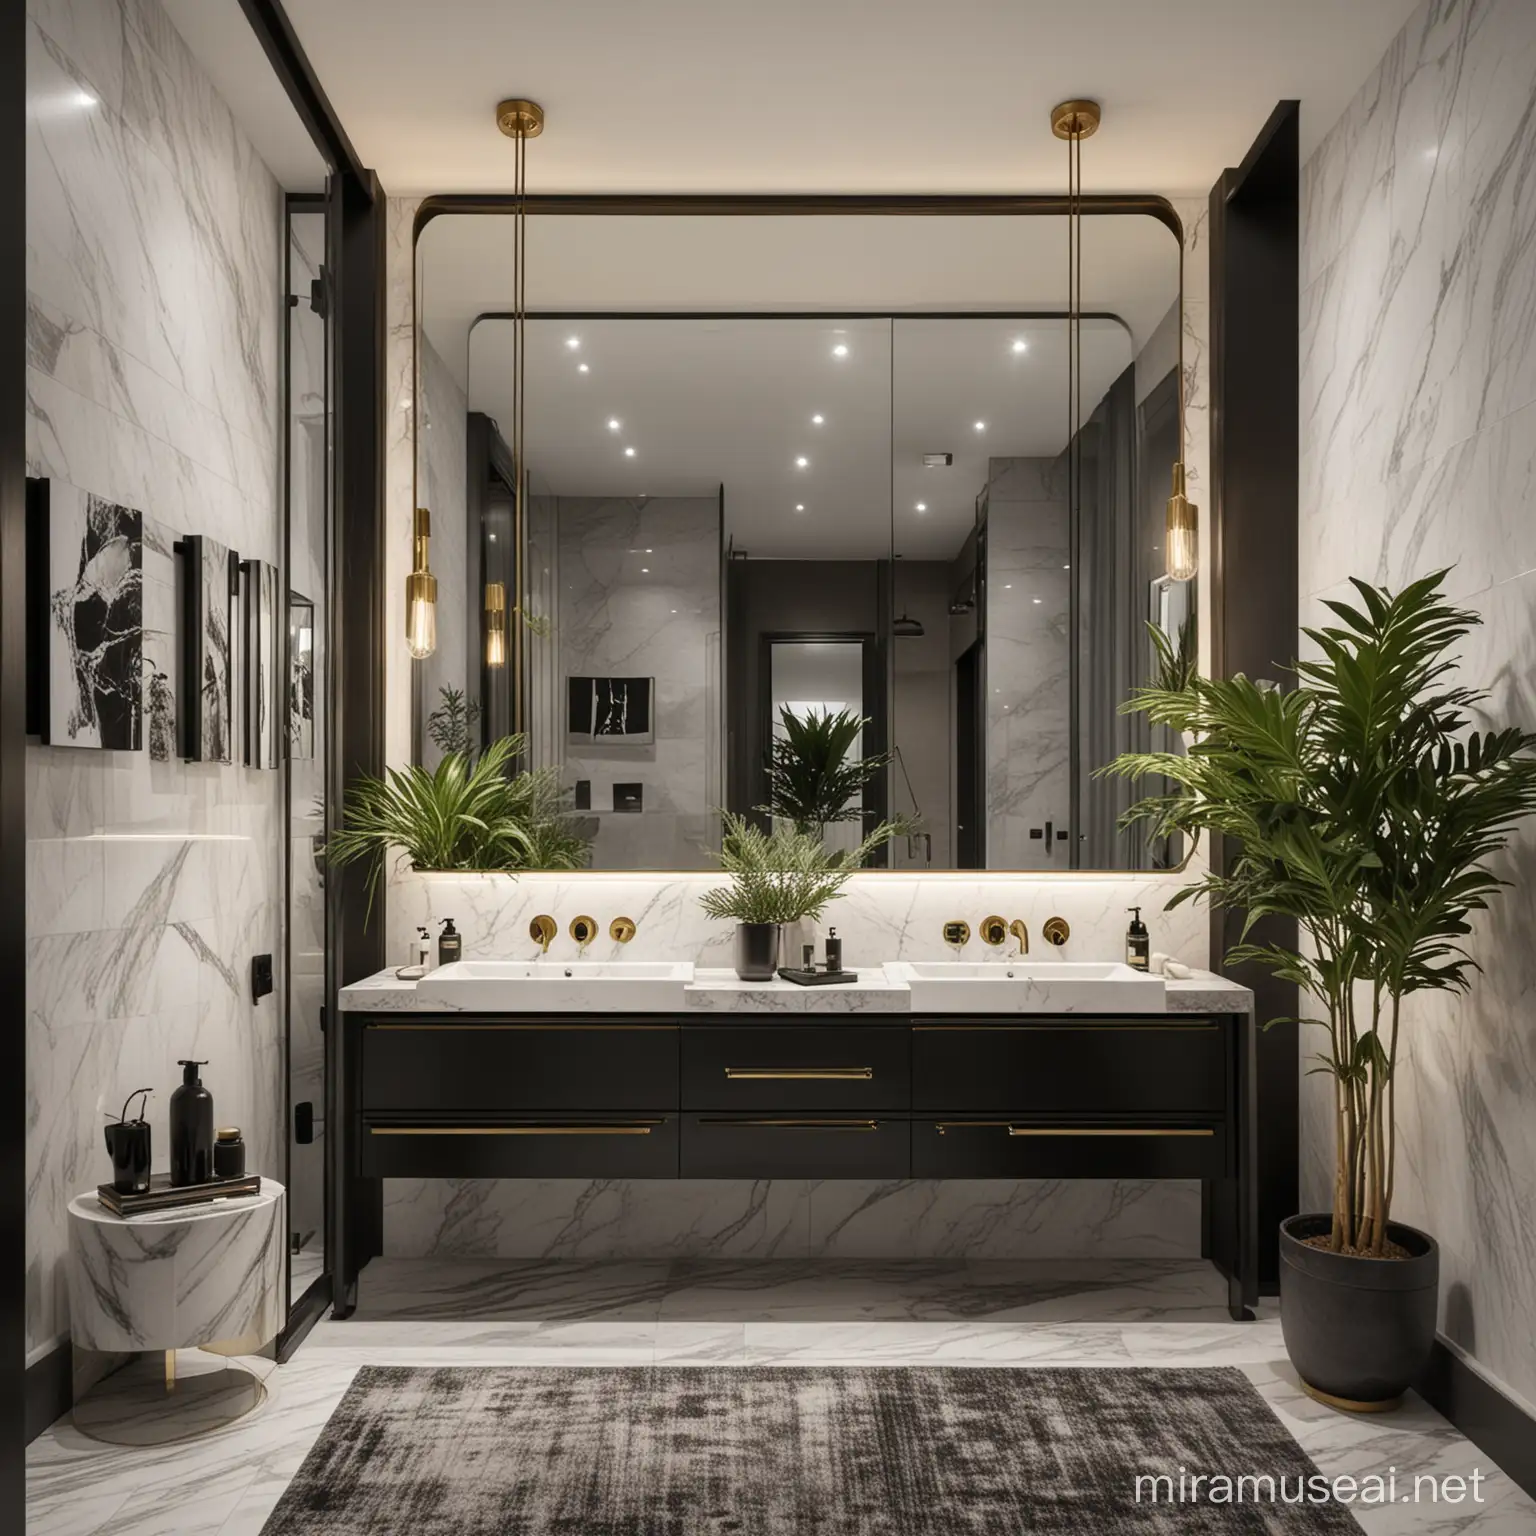 Modern Black and Brass Bathroom with Art and Plants